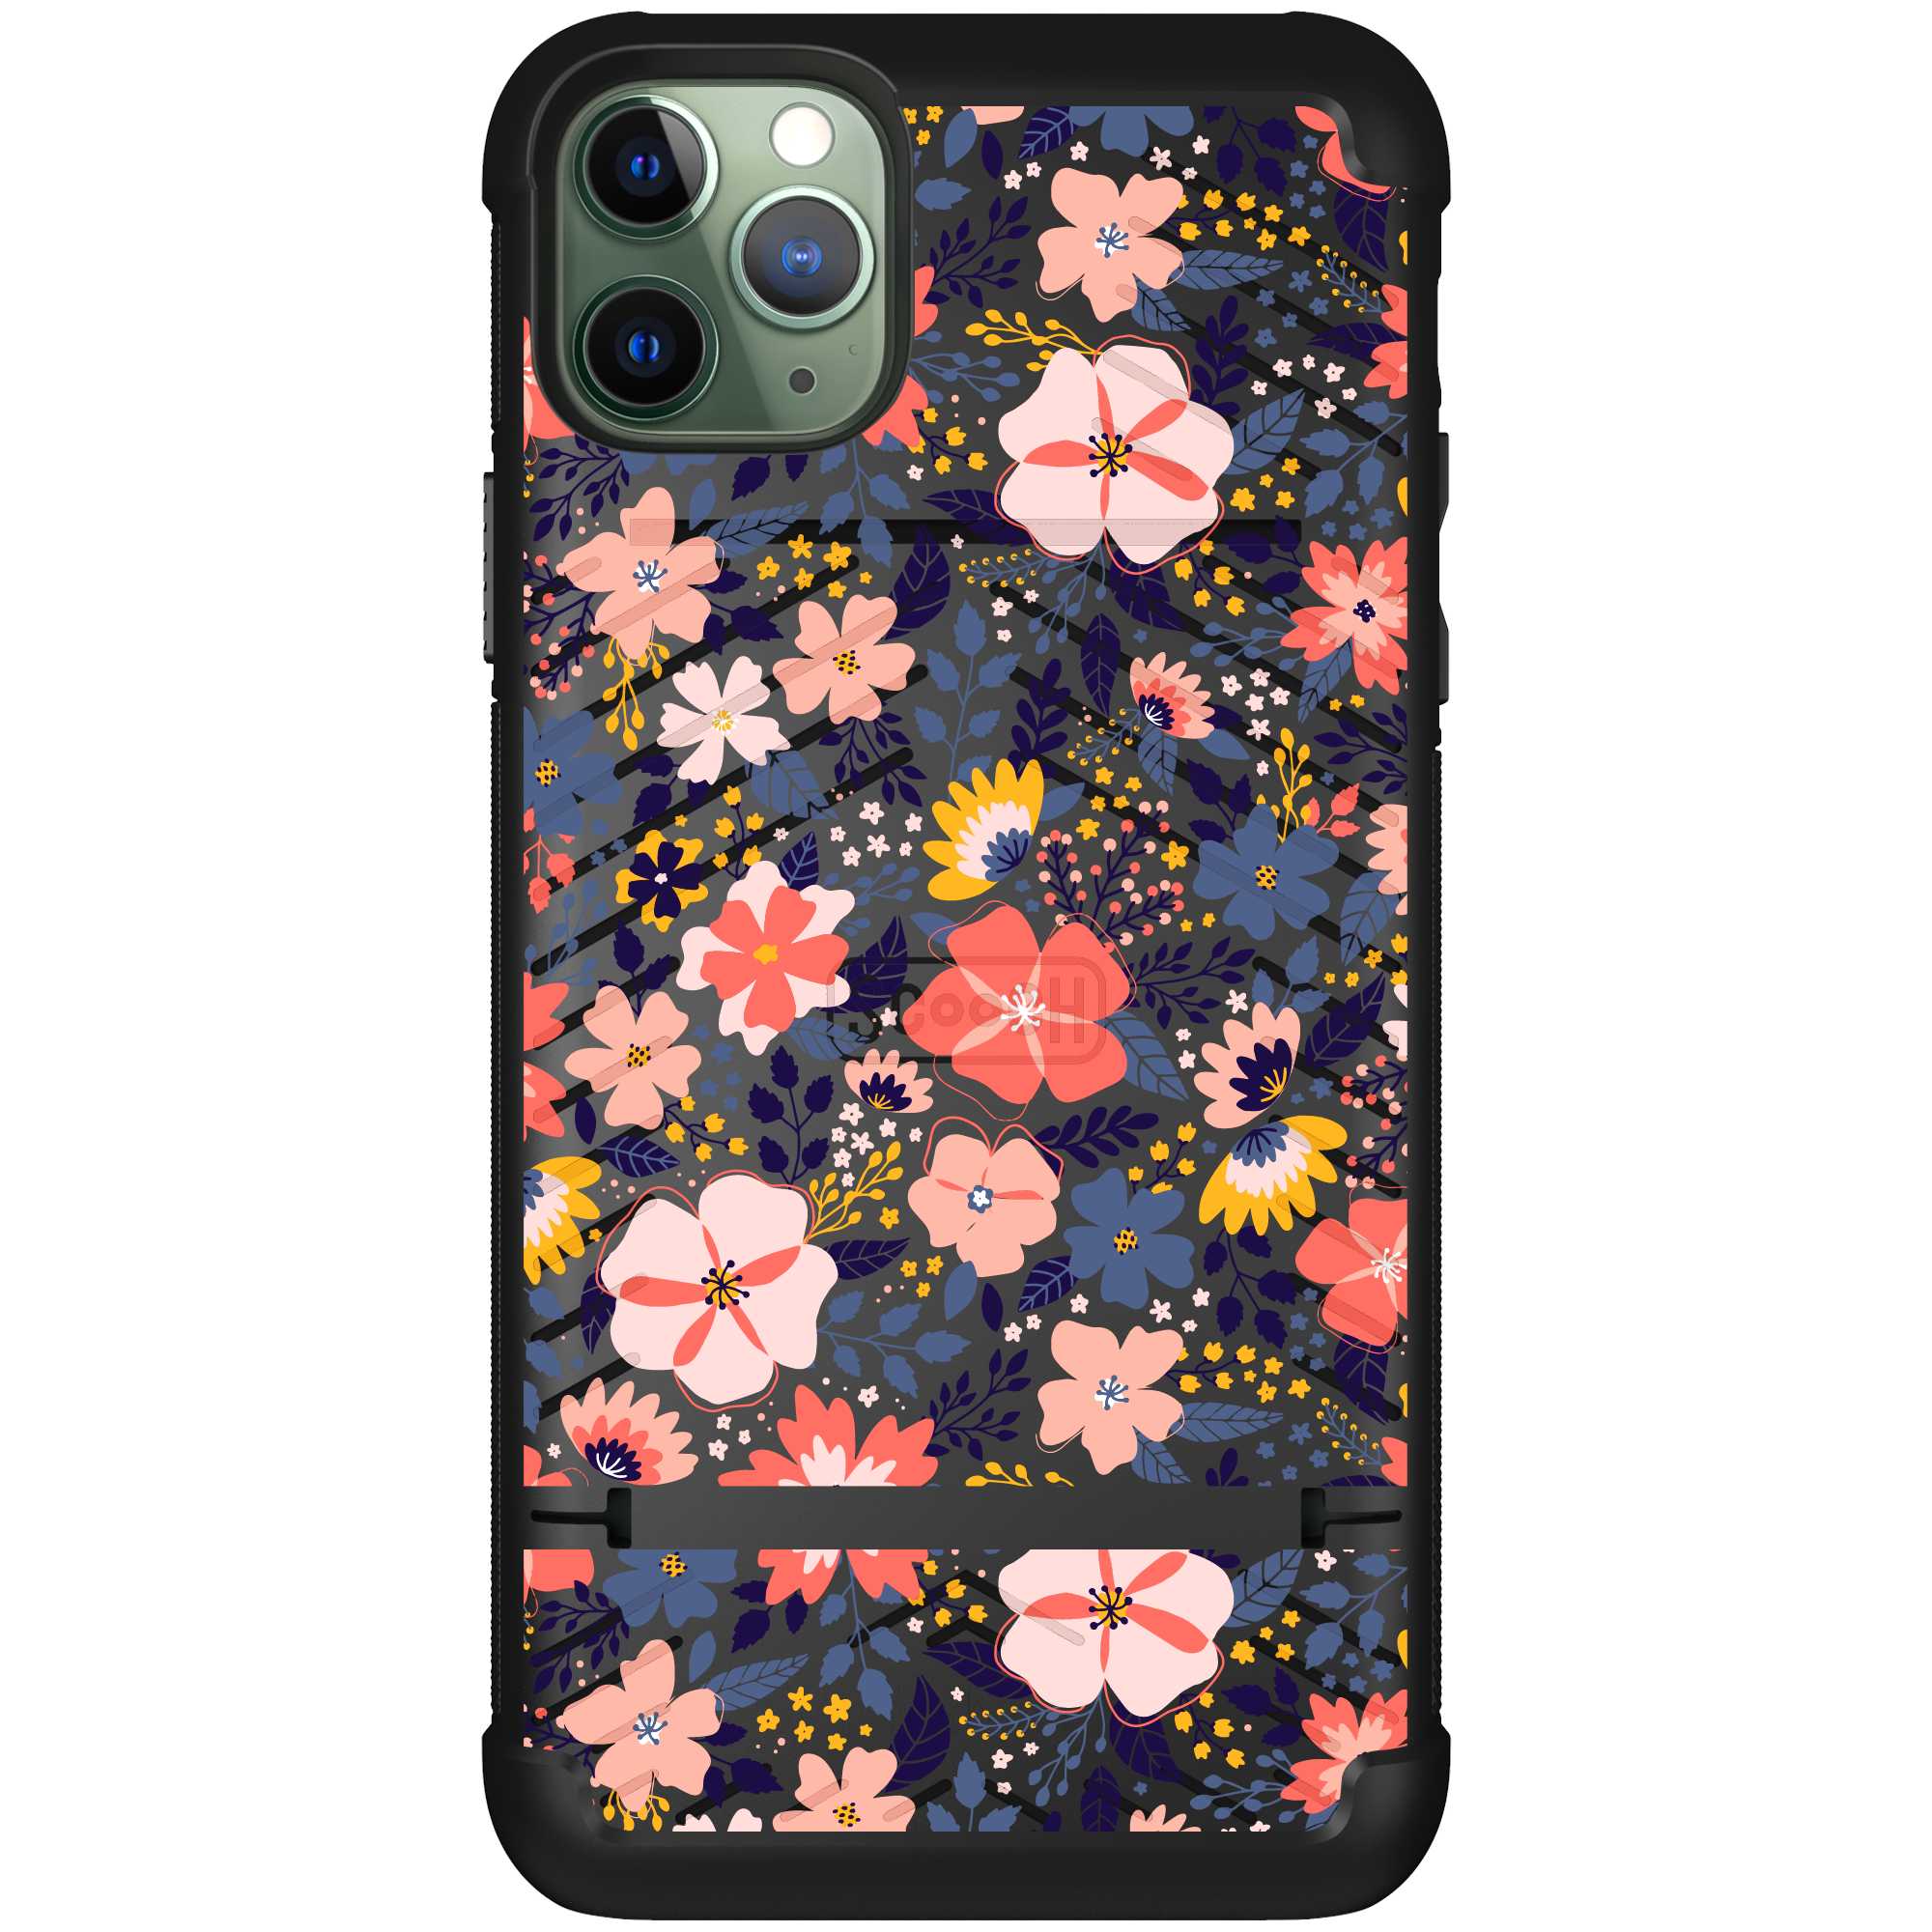 Scooch-Wingmate for iPhone 11 Pro Max-Wildflowers